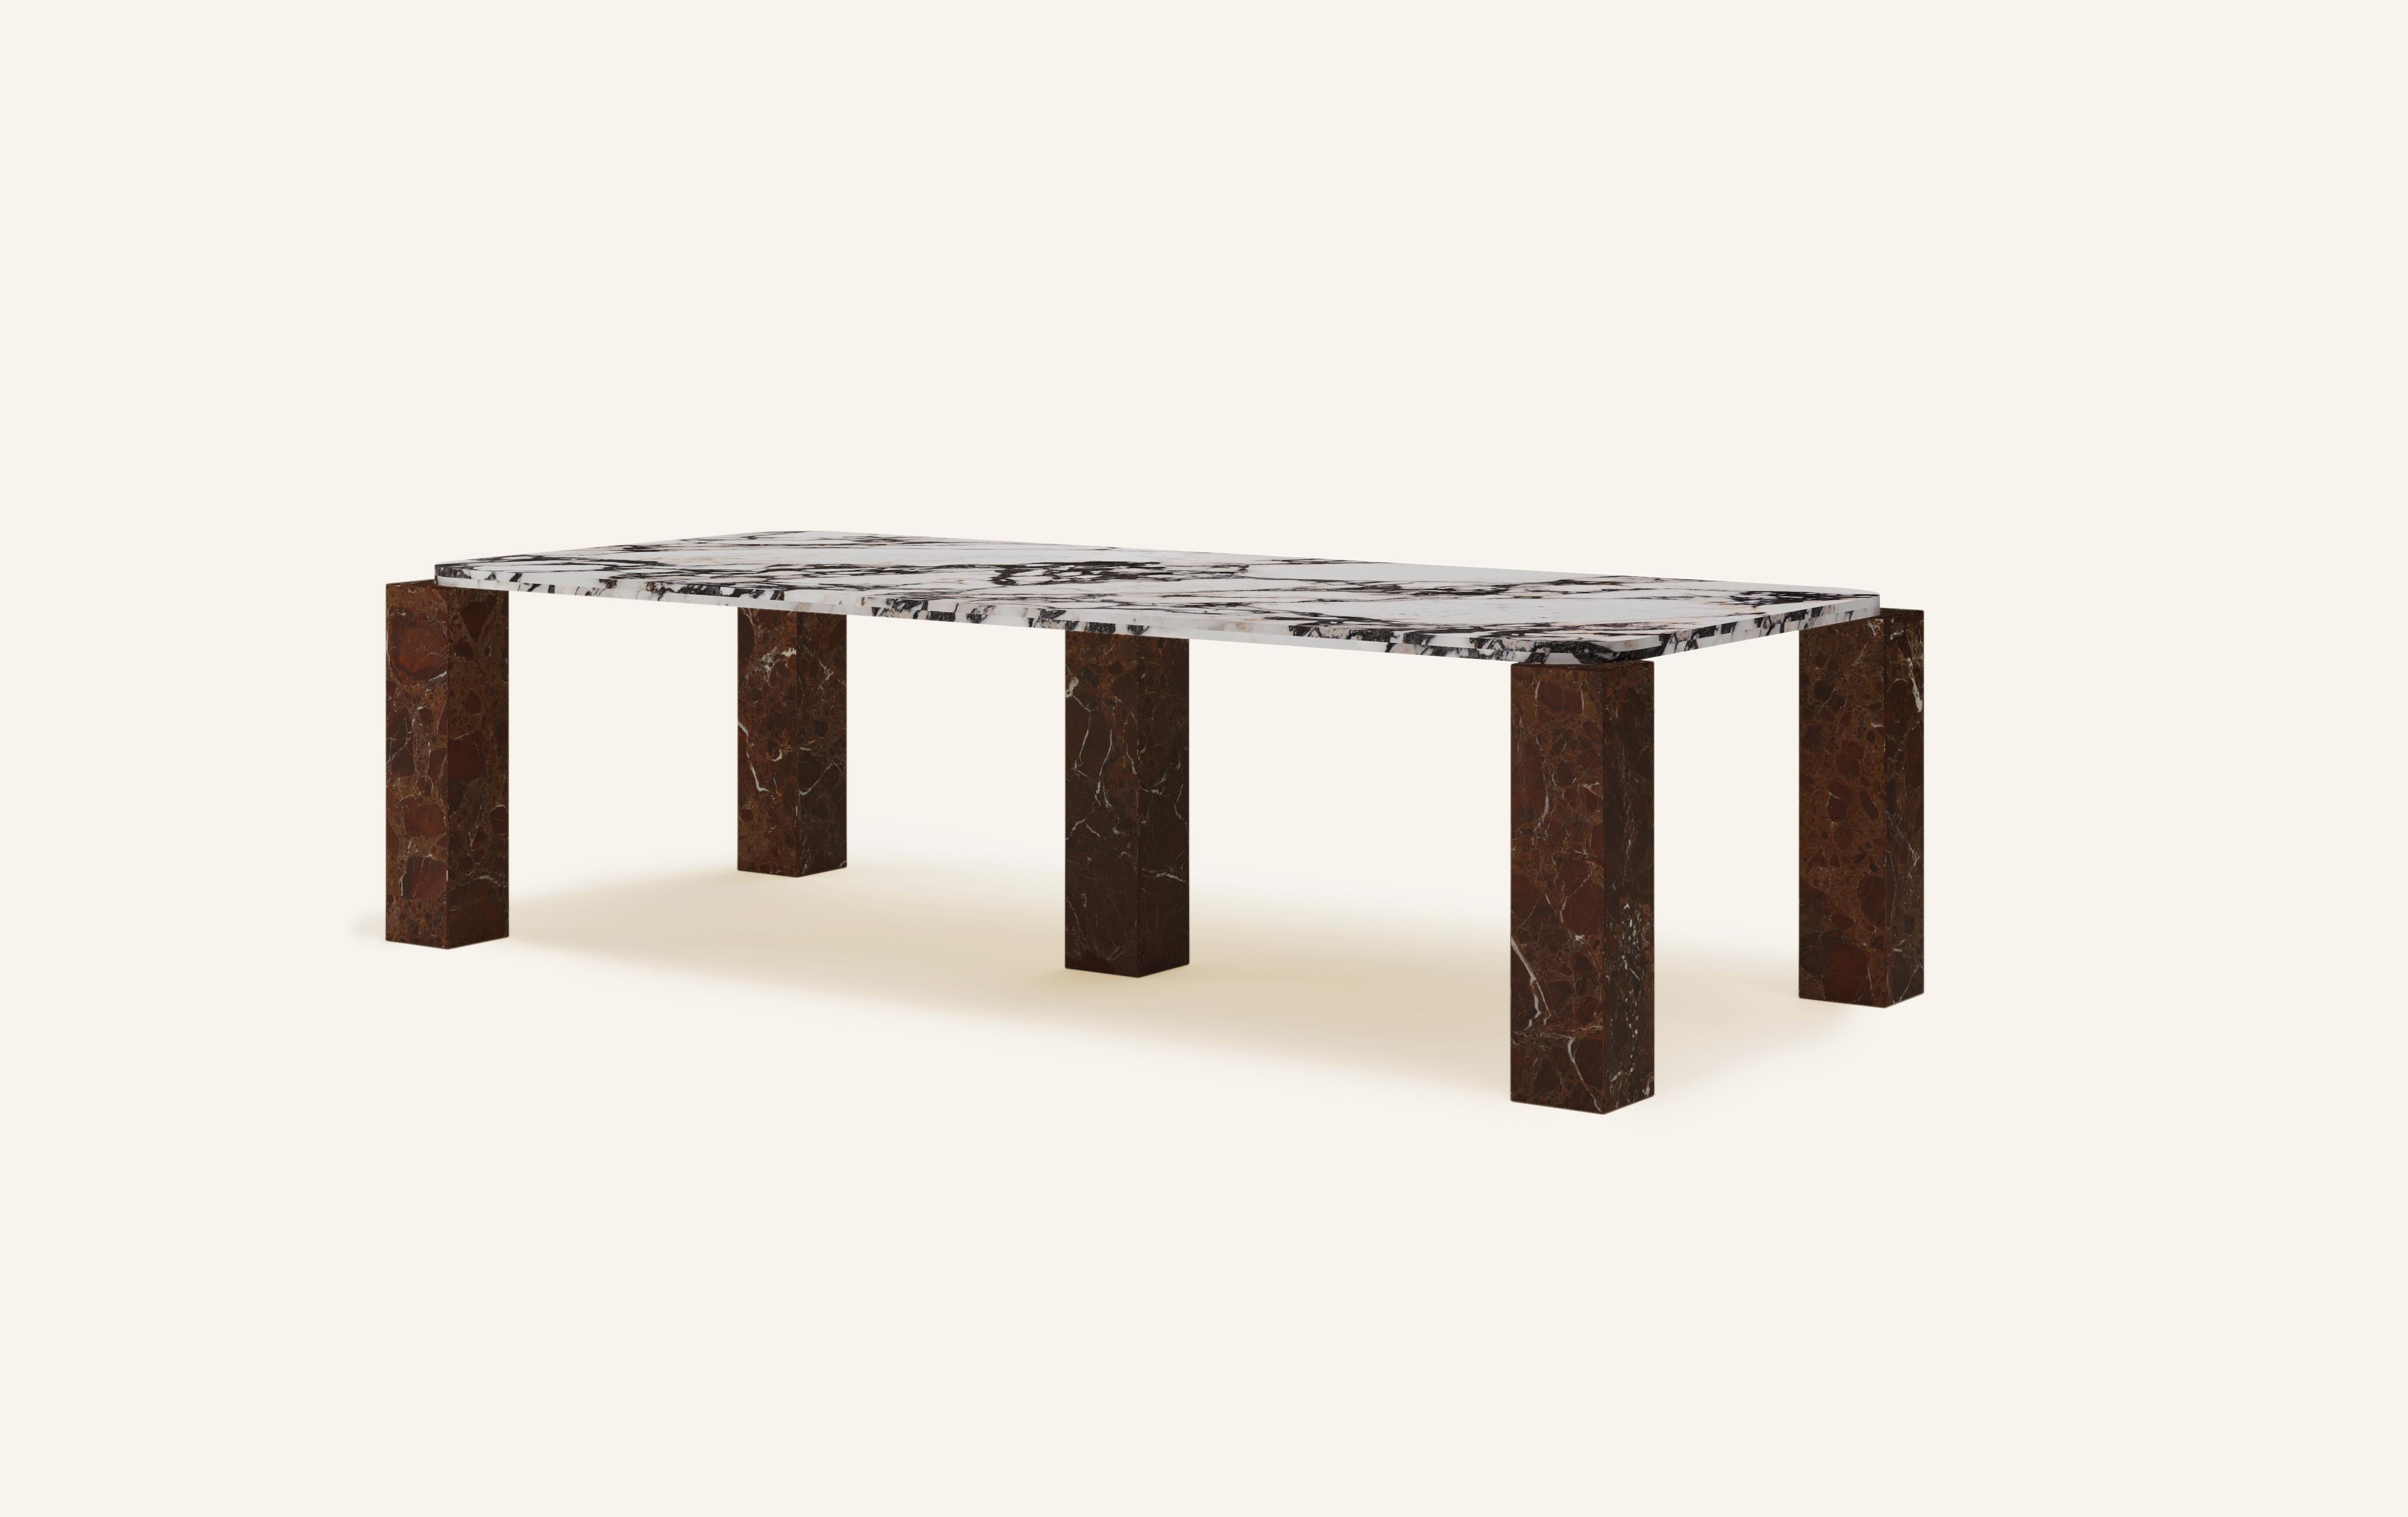 Organic Modern FORM(LA) Cubo Rectangle Dining Table 110”L x 50”W x 30”H Viola & Rosso Marble For Sale